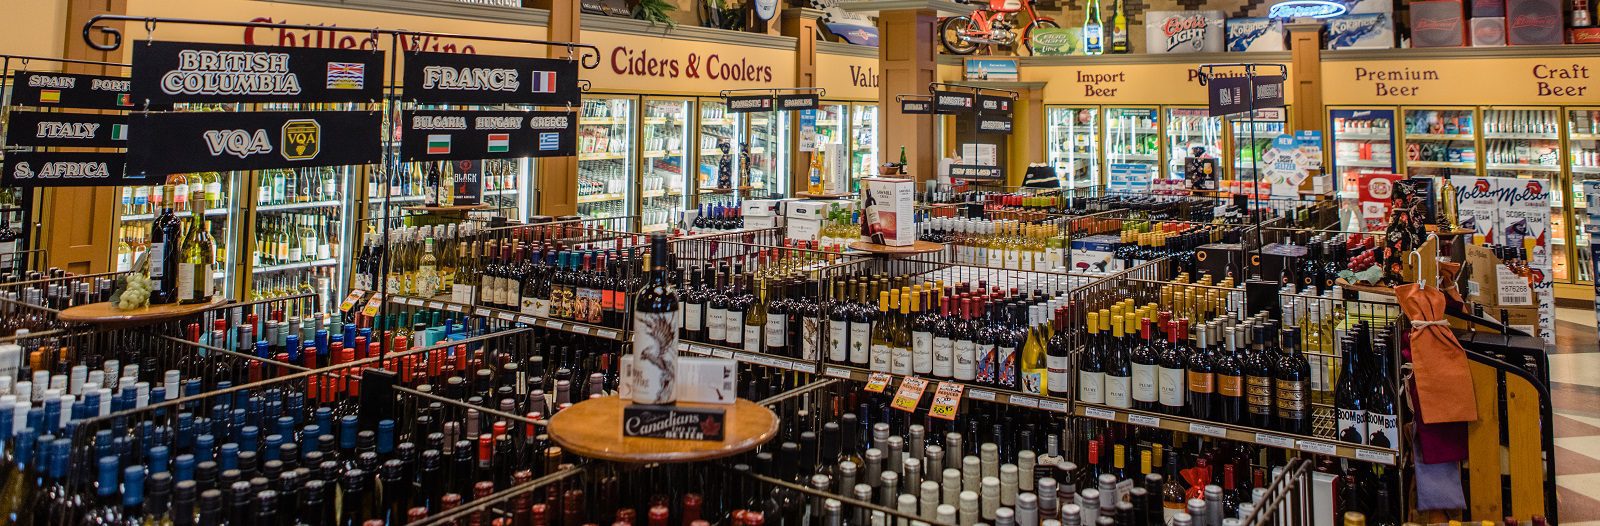 Featured image for “Channel Sales in BC Liquor Industry”